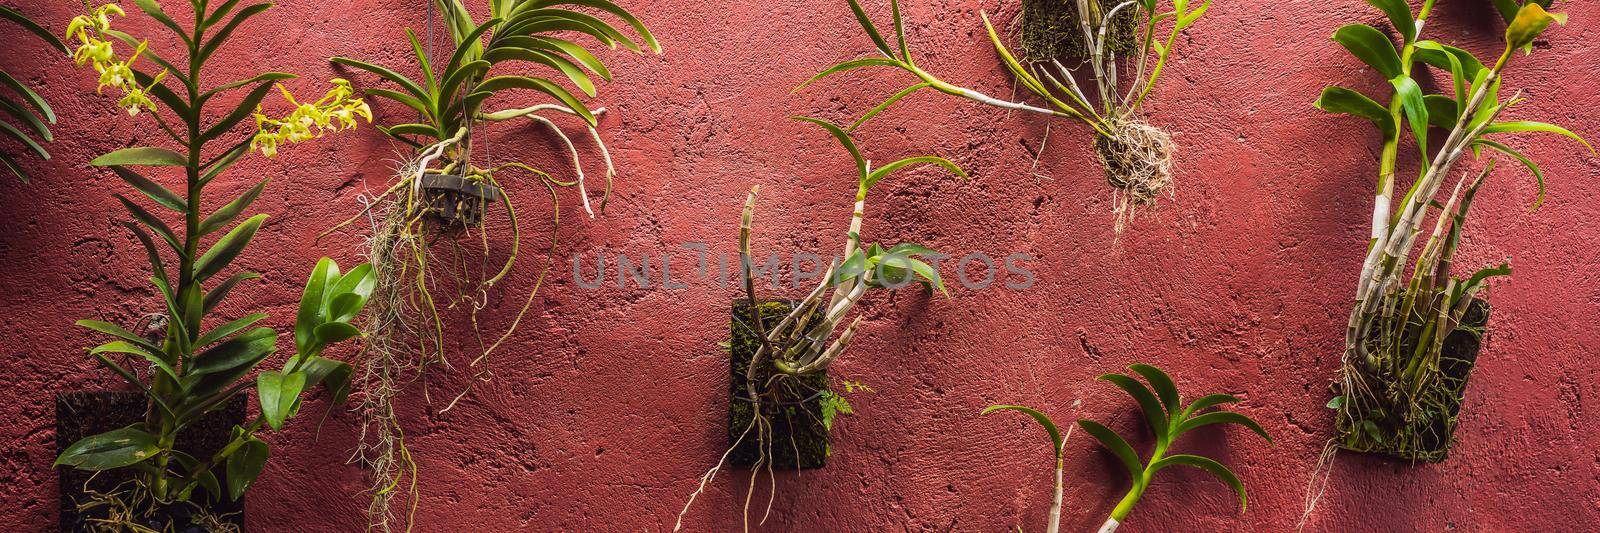 Different plants in pots on a red painted wall. BANNER, LONG FORMAT